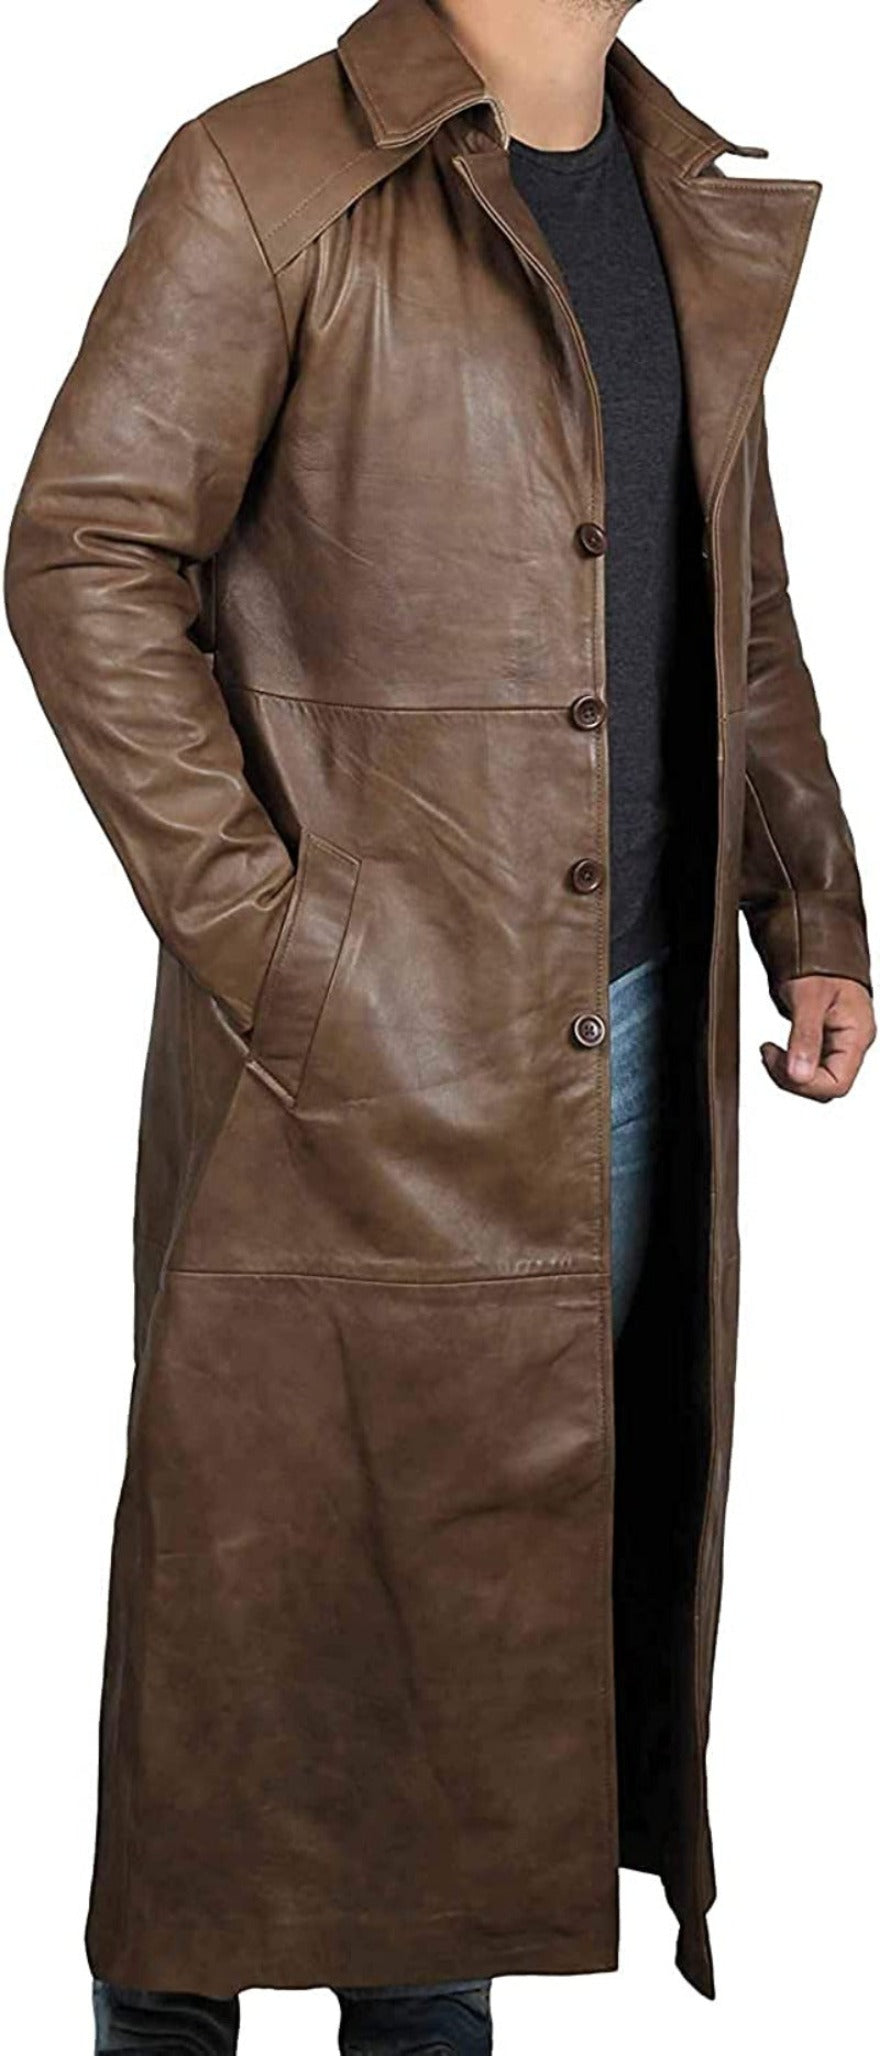 Picture of a model wearing our Mens Brown Leather Trench Coat Full Length, side view unbuttoned.